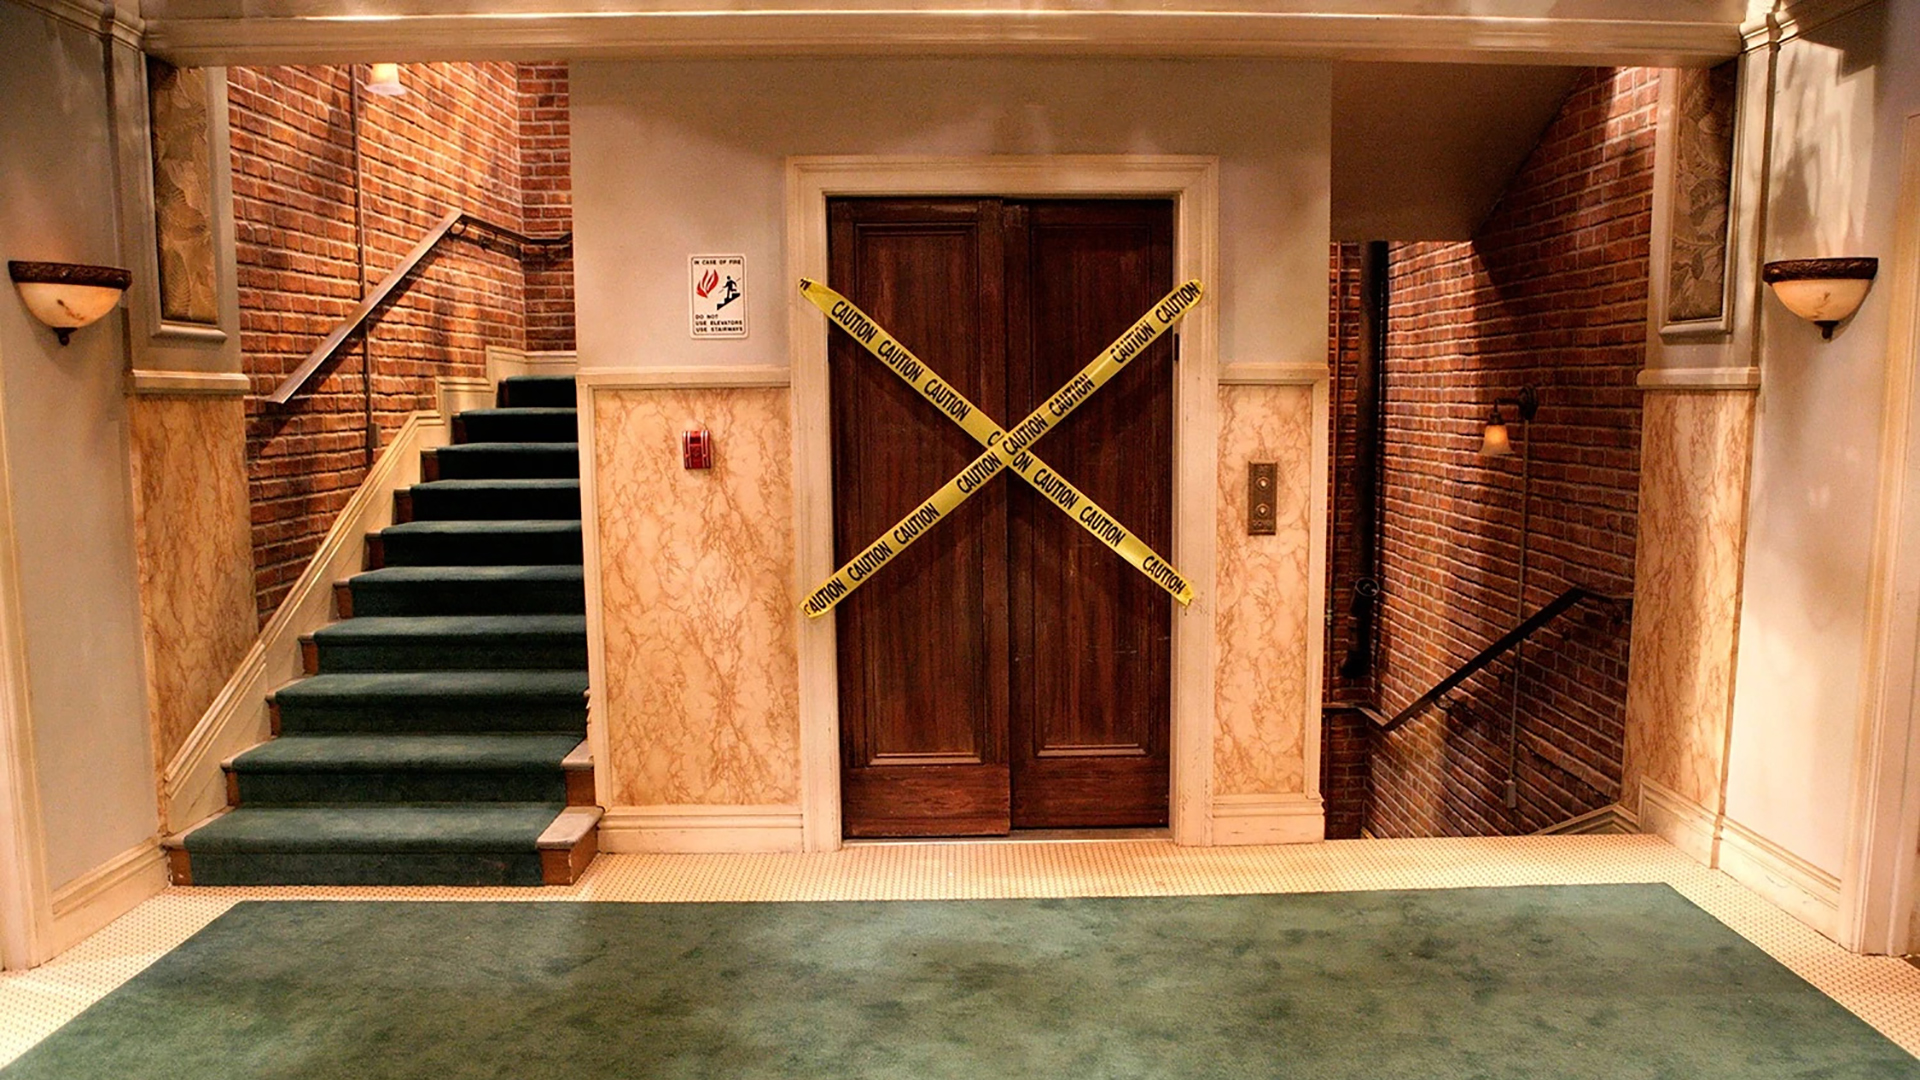 The Big Bang Theory elevator hall. Virtual background to use on Zoom, Microsoft Teams, Skype, Google Meet, WebEx or any other compatible app.